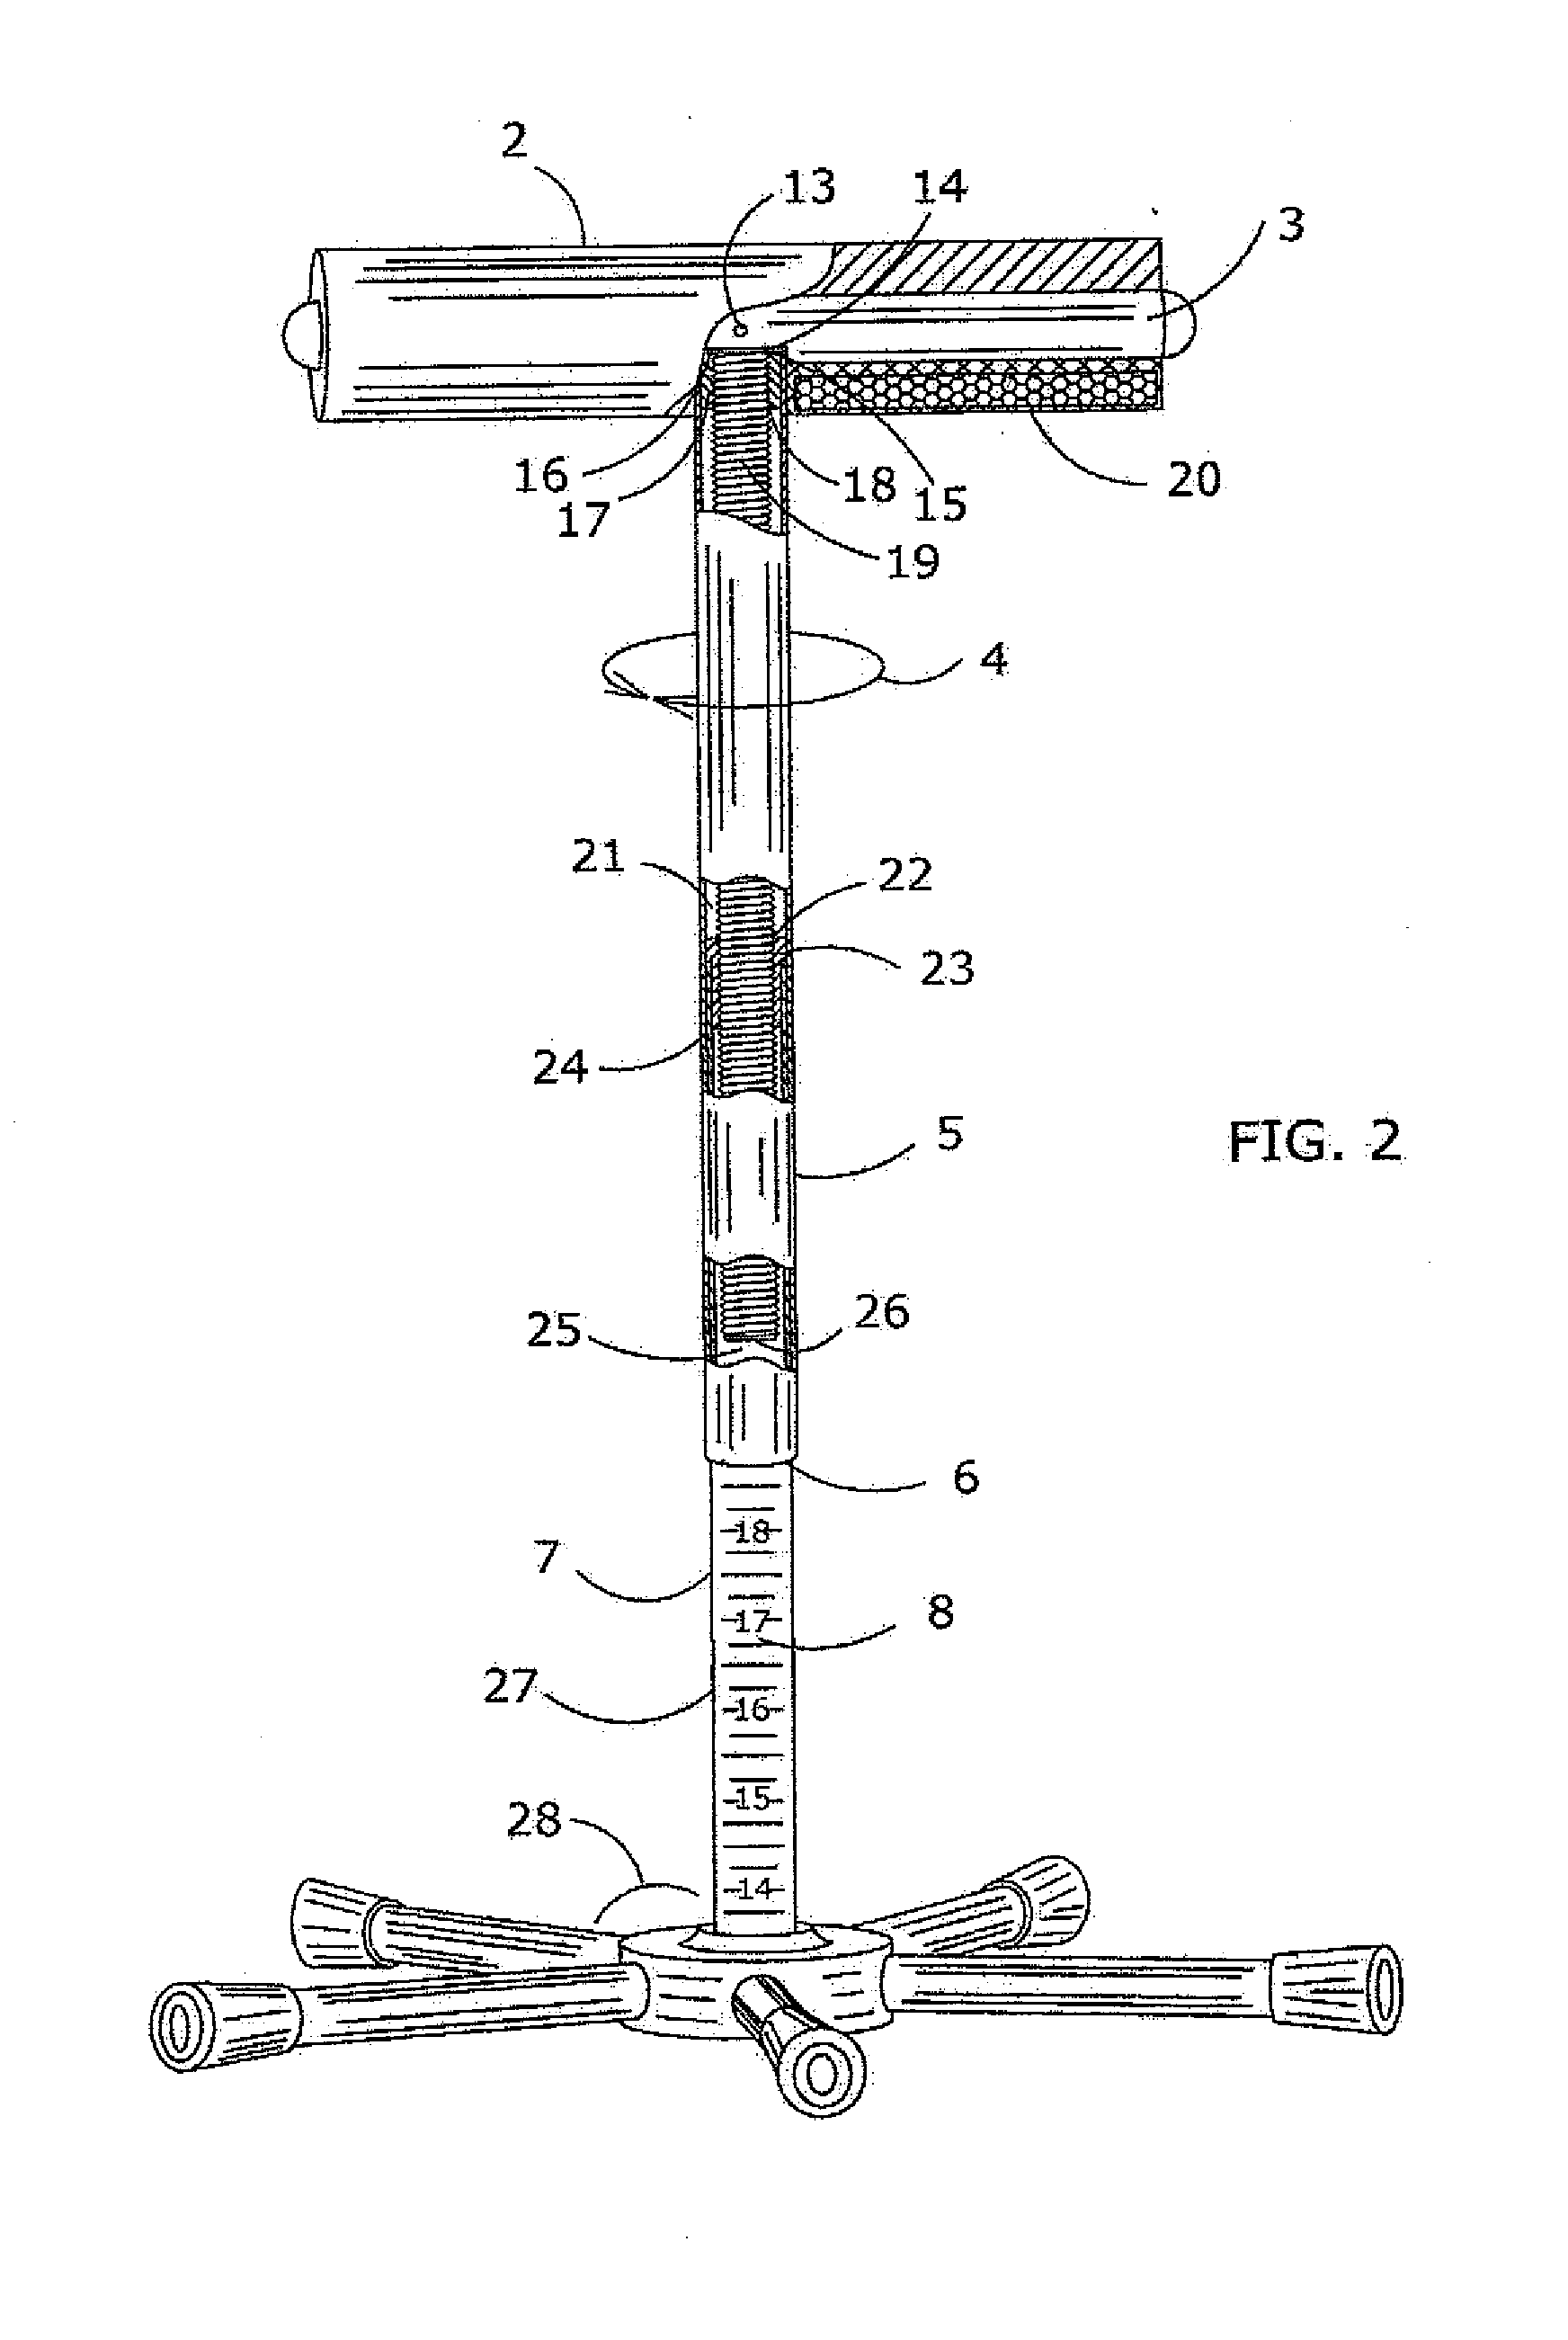 Passive Knee Joint and Knee Extension Device